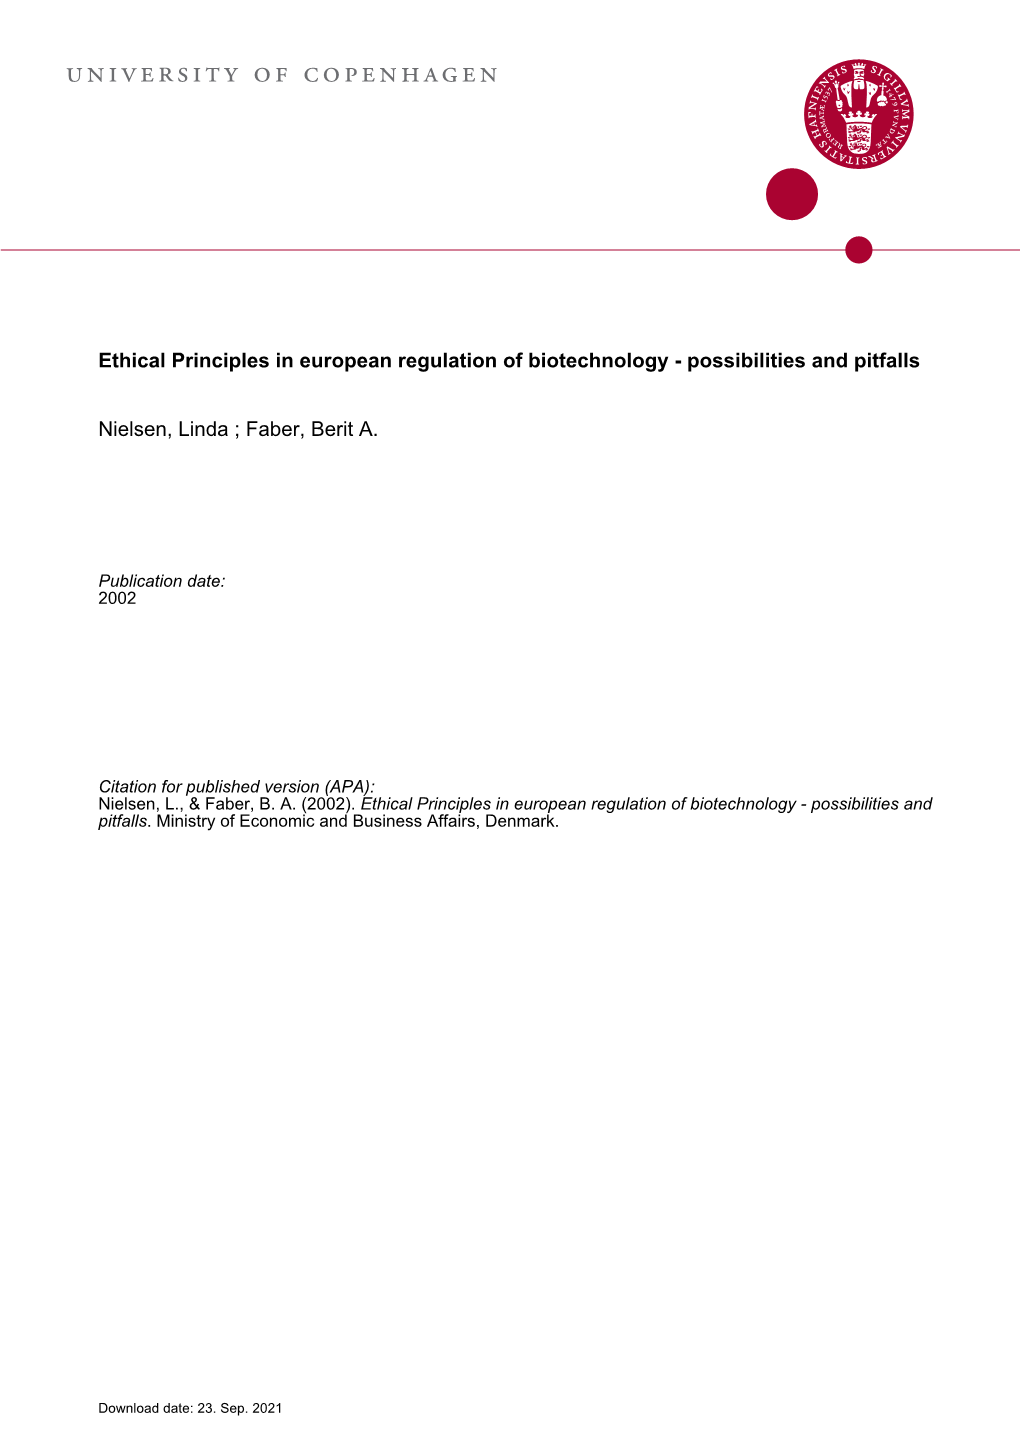 Ethical Principles in European Regulation of Biotechnology - Possibilities and Pitfalls